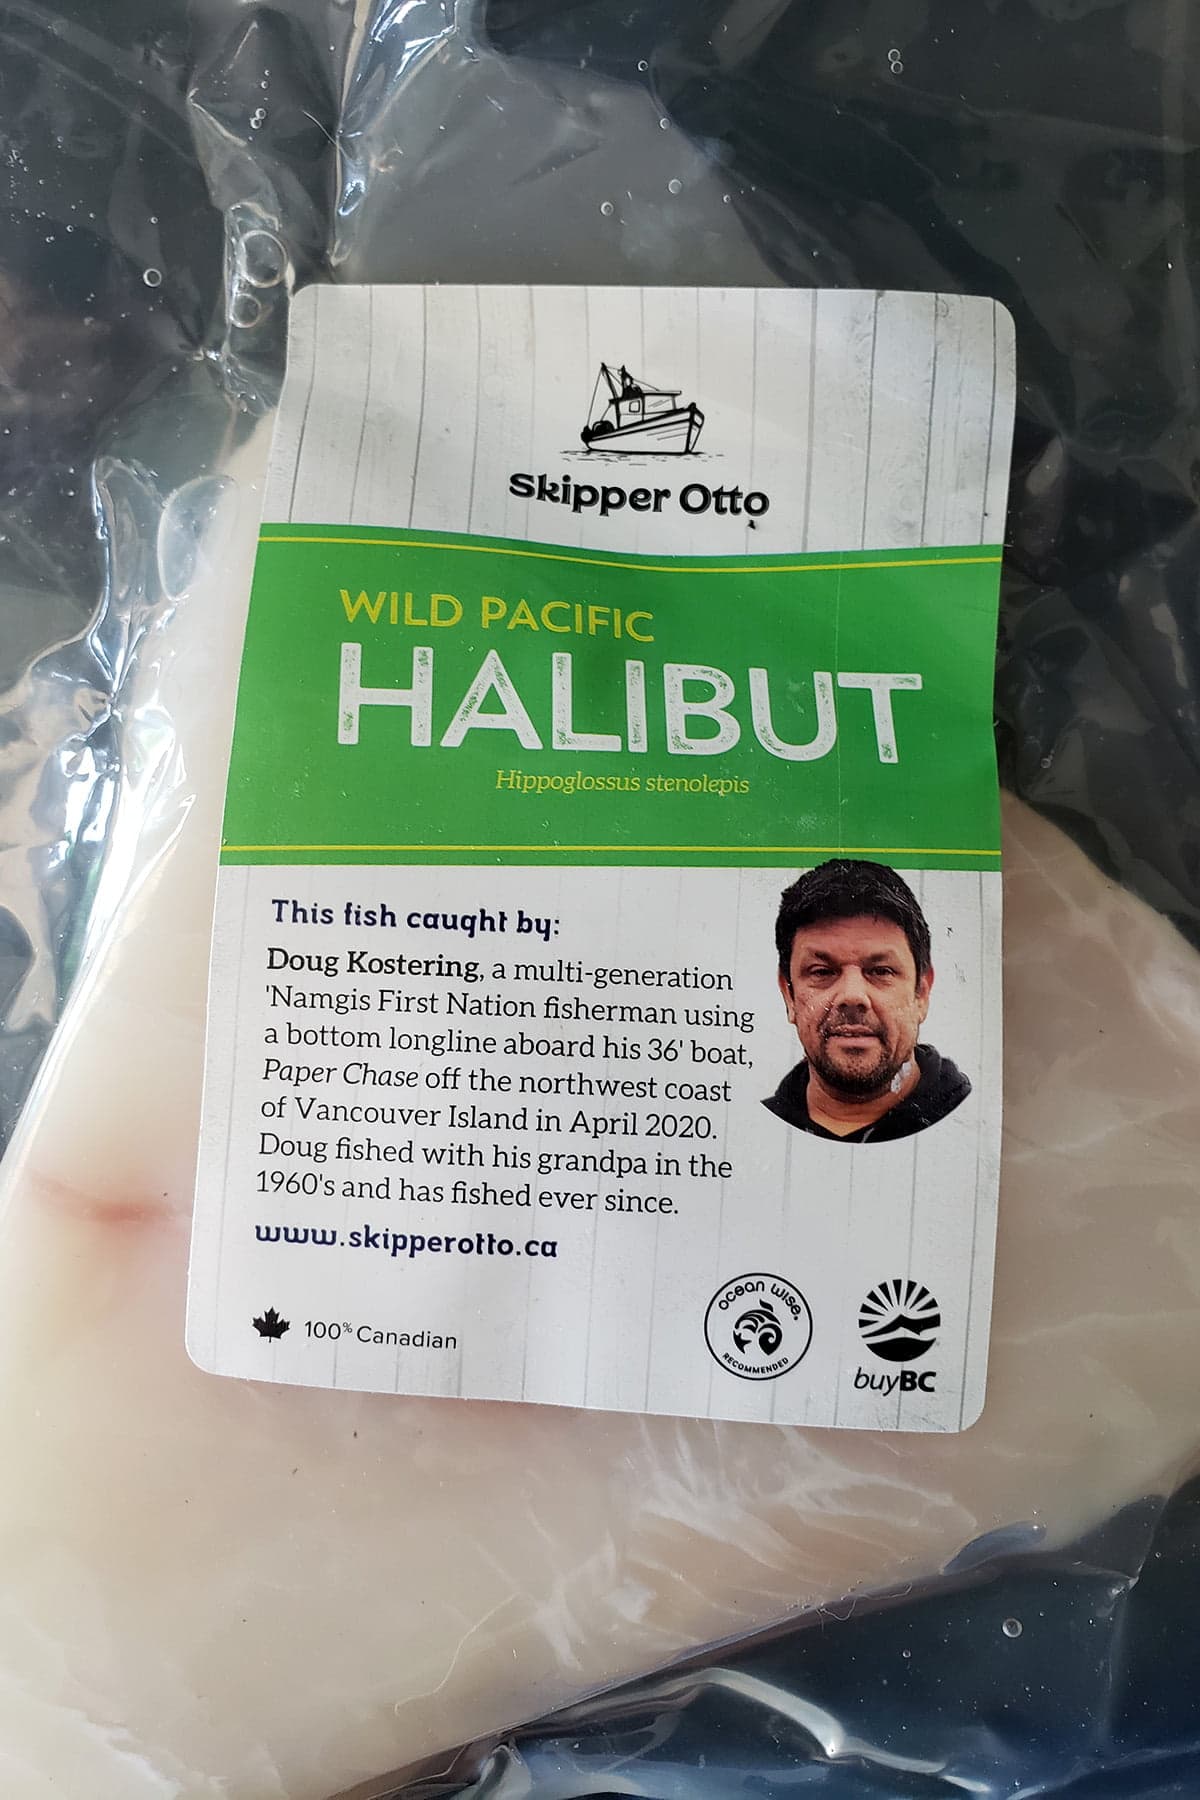 A shrink wrapped package of Skipper Otto halibut. A man's face and bio is pictured on the label.